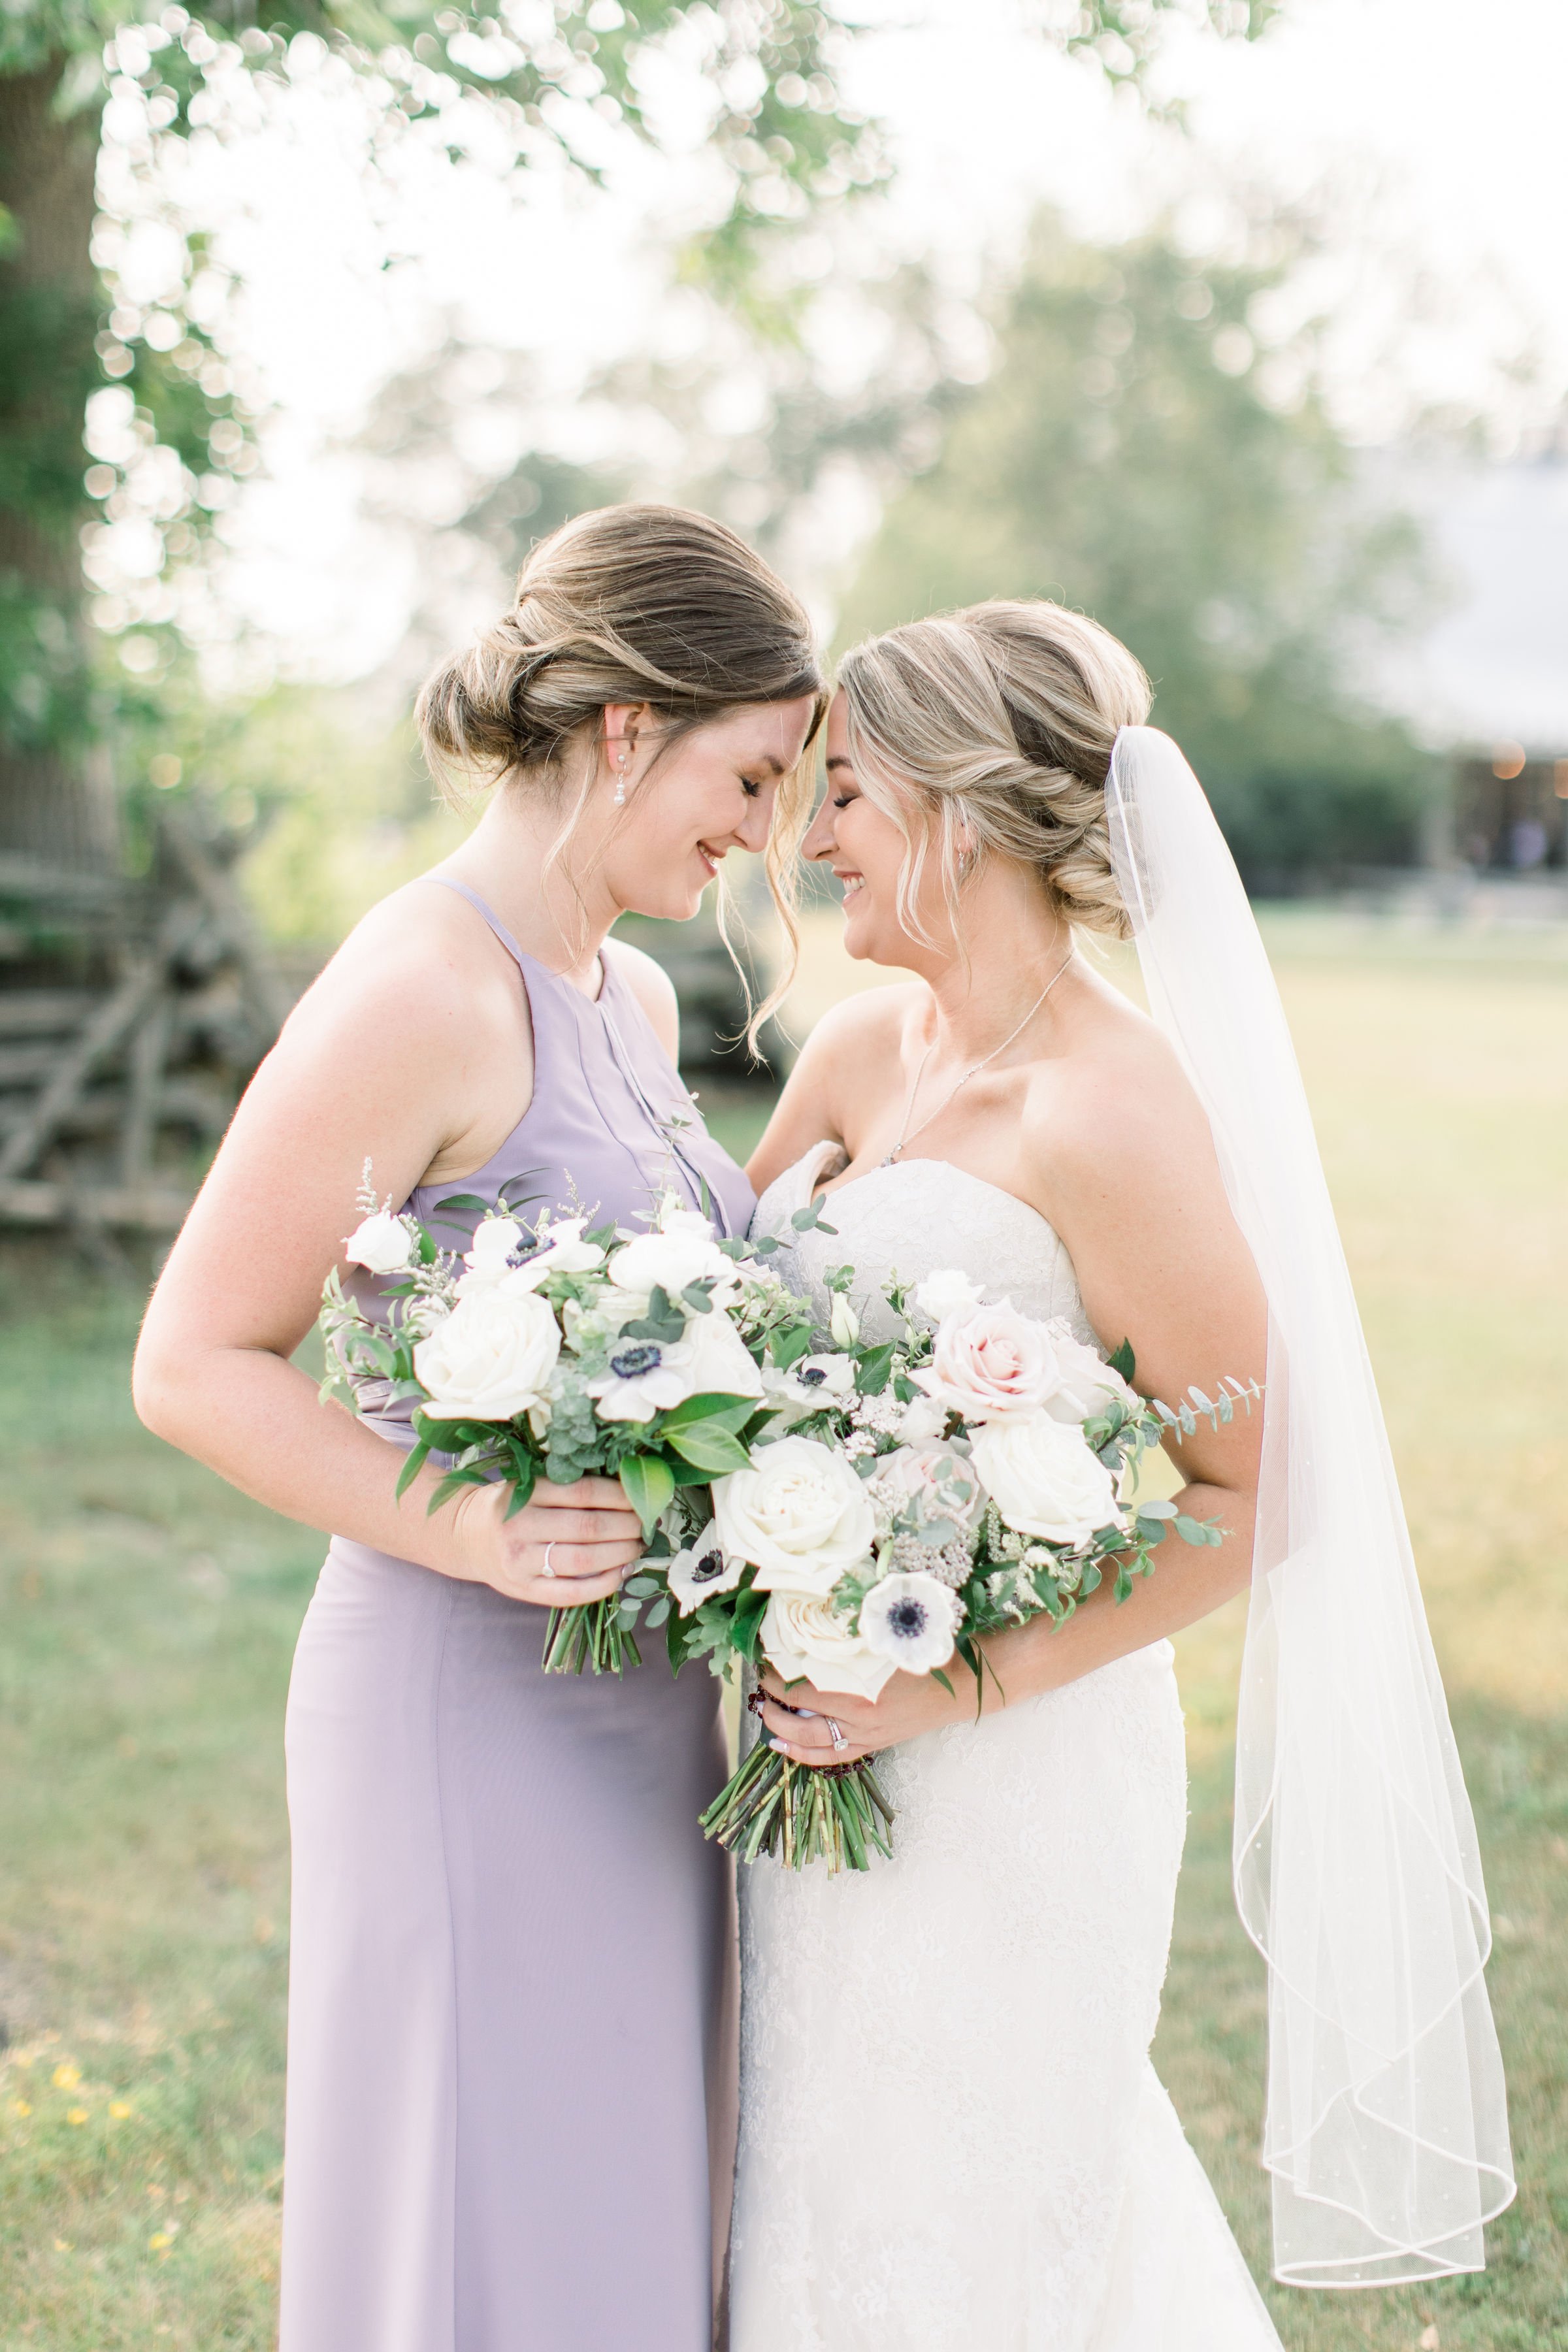  A bride and her maid of honor place their foreheads together captured by Chelsea Mason Photography. maid of honor poses #StonefieldEstates #Ontarioweddings #Chelseamasonphotography #Chelseamasonengagements #Ontarioweddingphotographers 